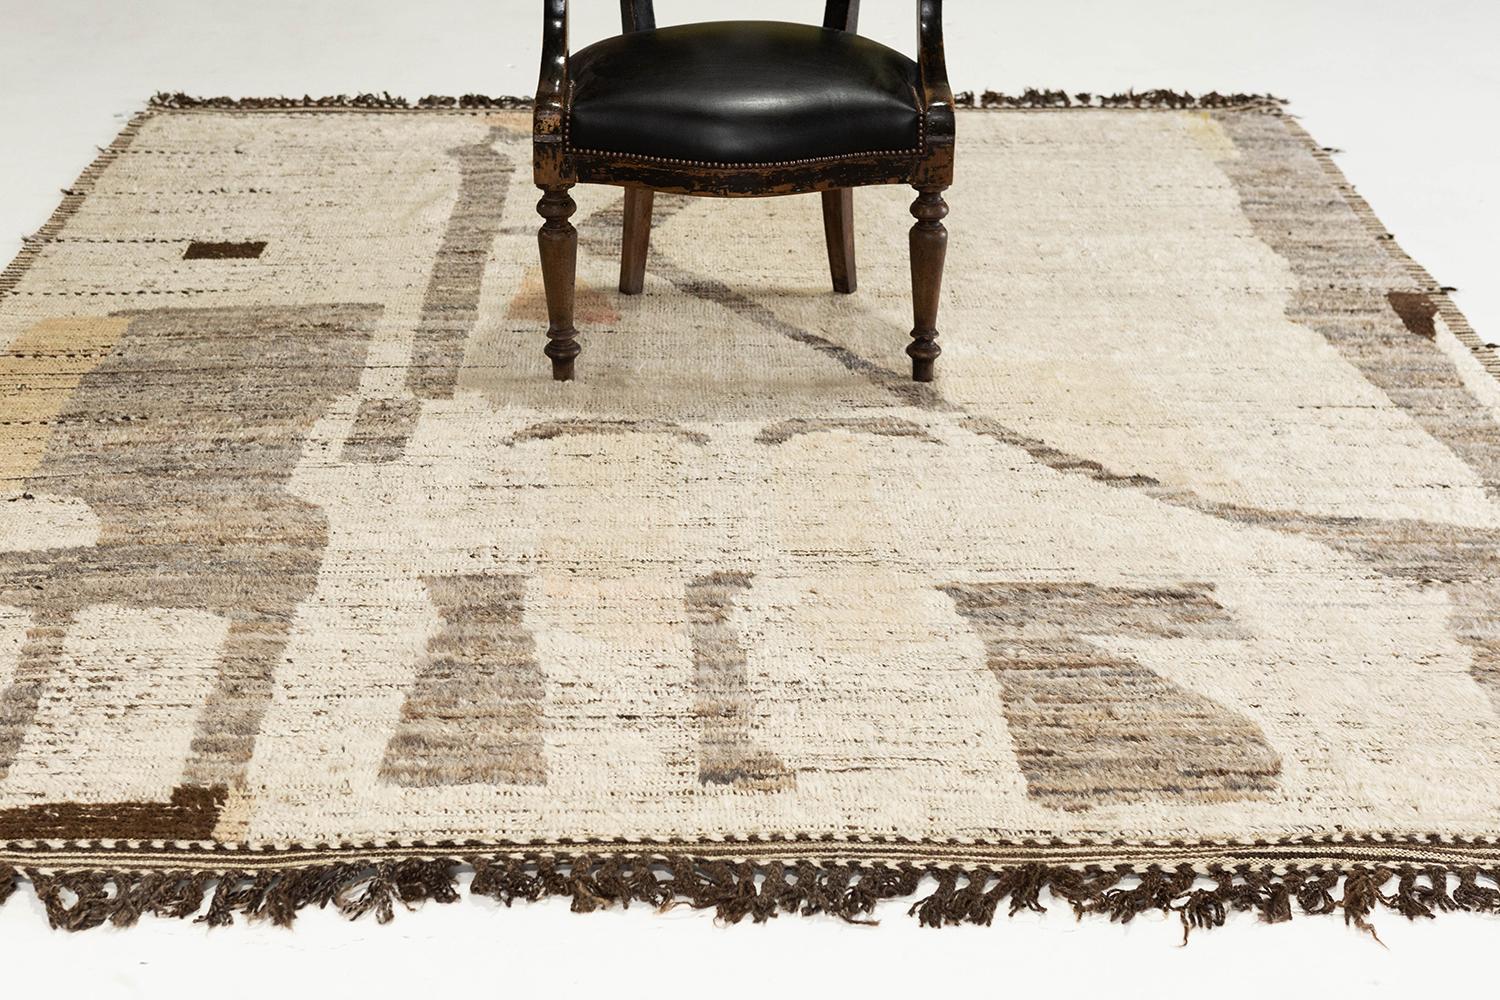 'Sittima' is a natural earth toned pile weave and modern day interpretation of the Moroccan world. The rugs irregular shapes and strokes resemble the fibers of nature and their ability to be used for crafts such as cords and basketry. Designed in